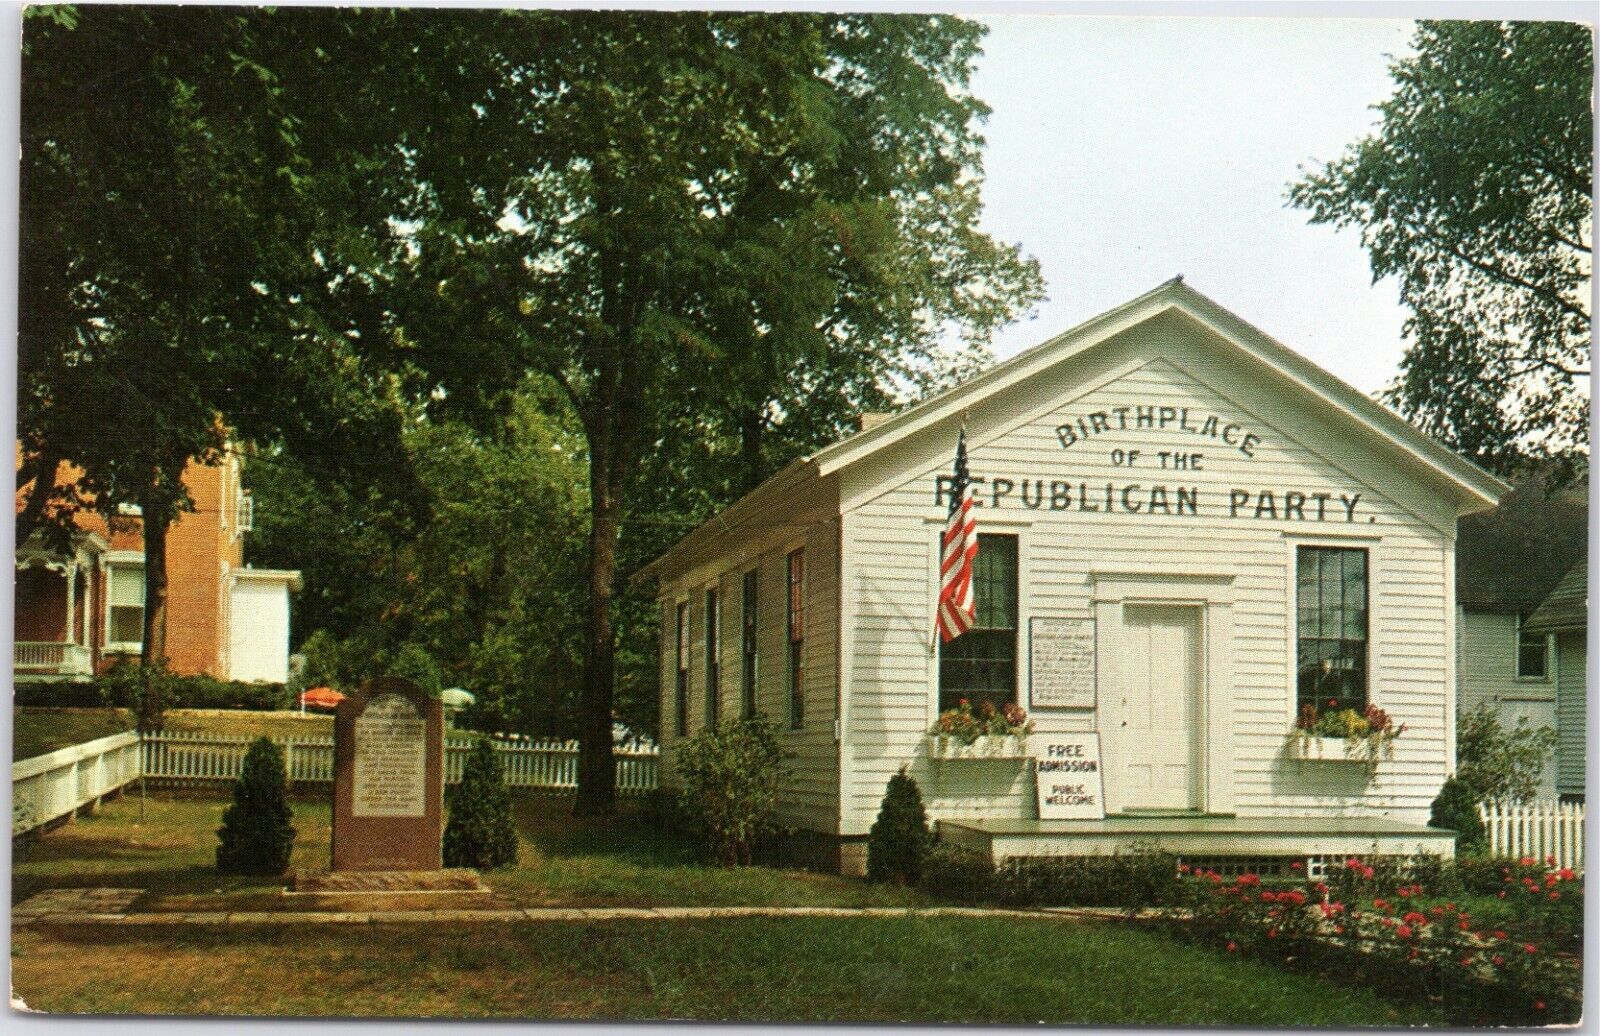 Little White School House, Birth Place Republican Party Ripon WI postcard